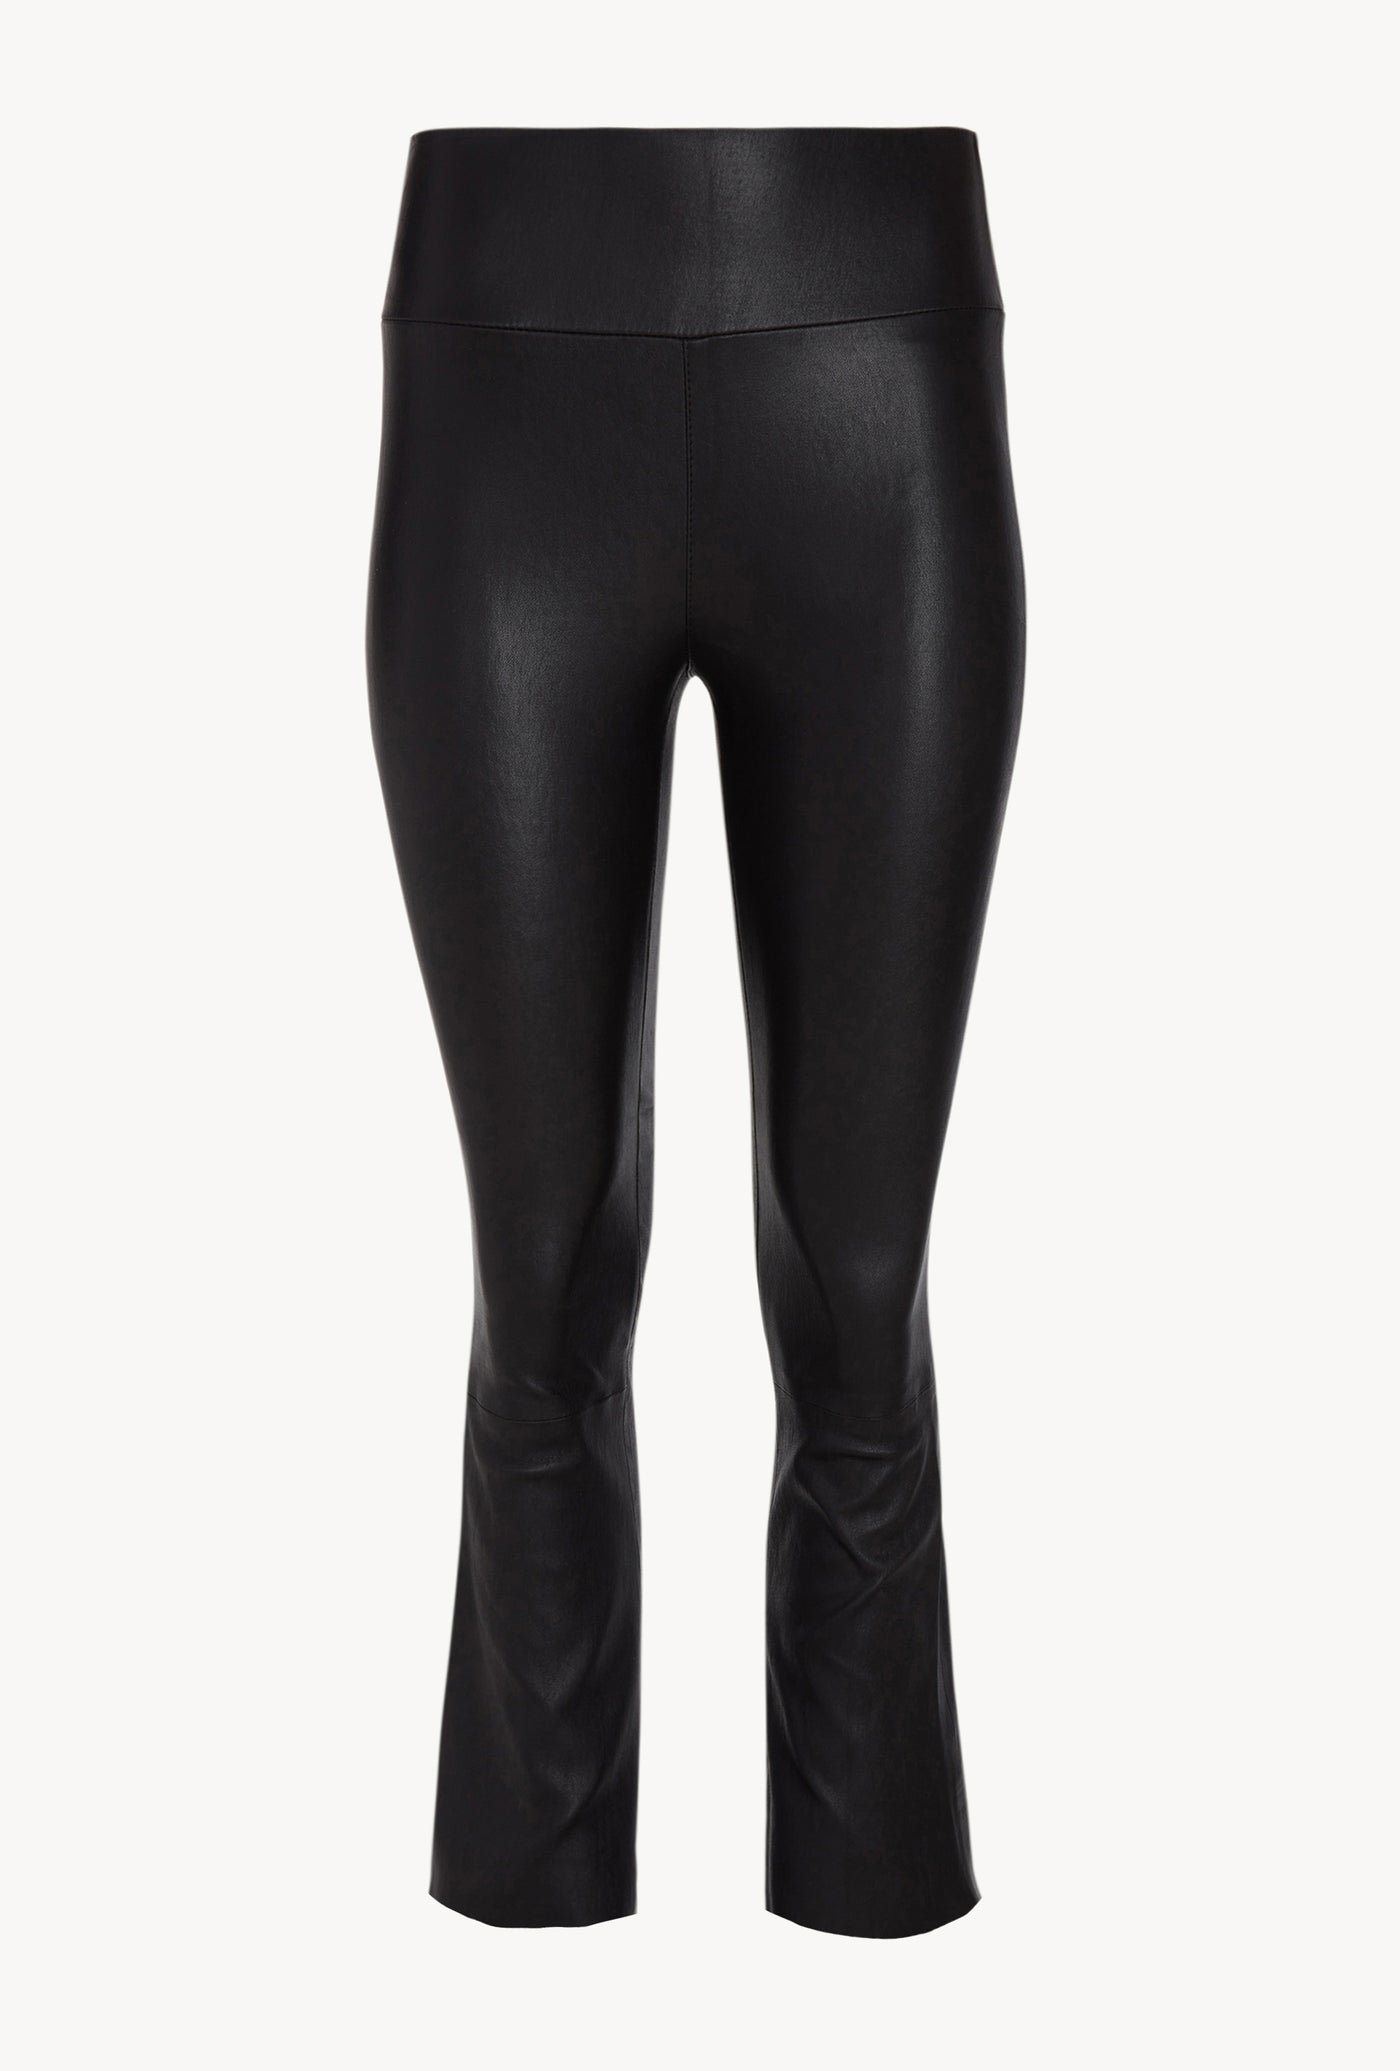 SPRWMN Stretch Leather Leggings, High Waisted Crop Flare in Black